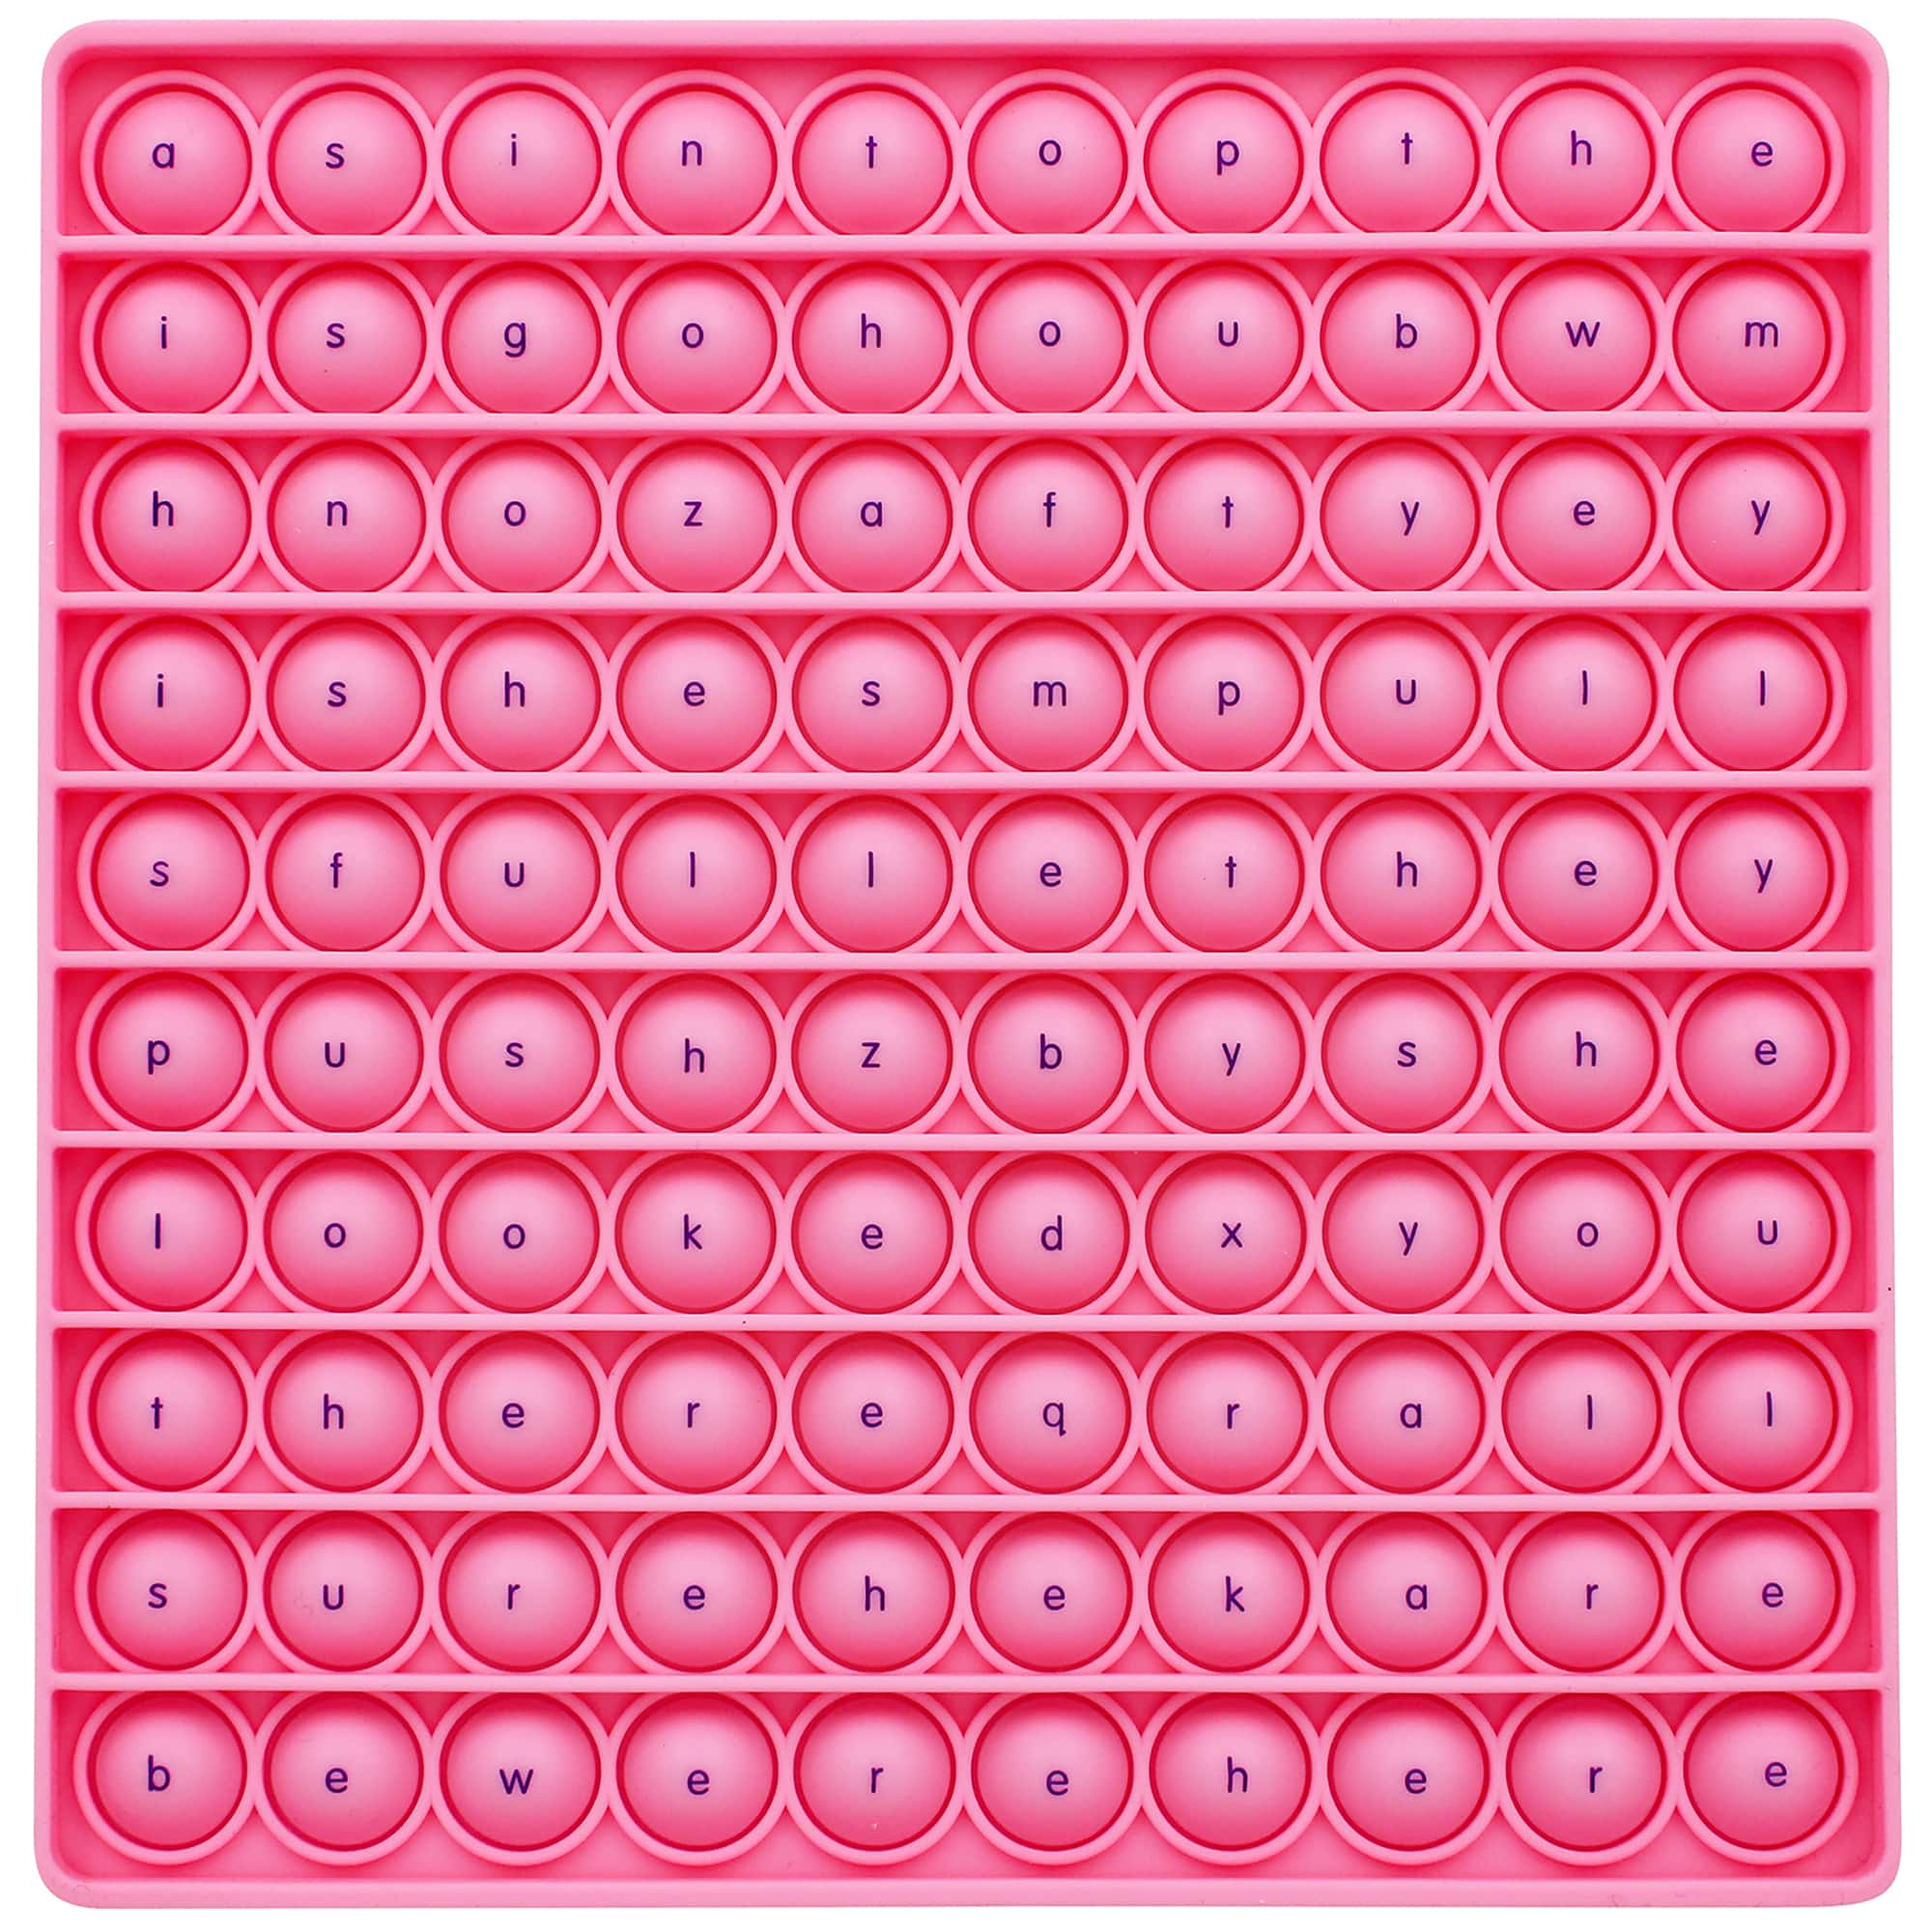 Junior Learning&#xAE; Tricky Word Search Bubble Board